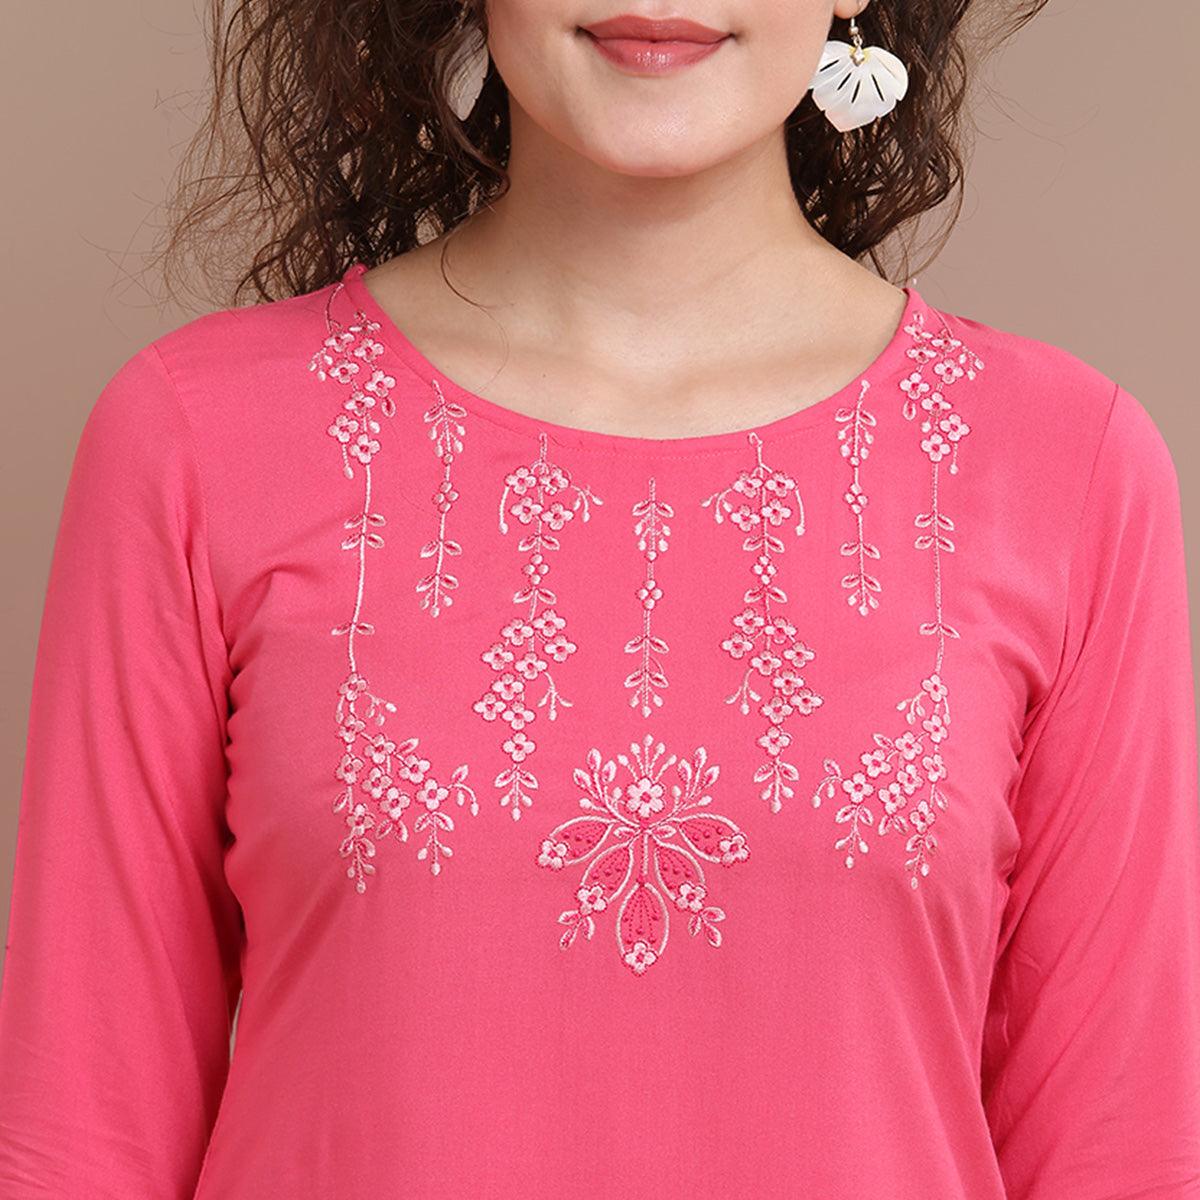 Appealing Pink Colored Partywear Floral Embroidered Rayon Kurti - Peachmode